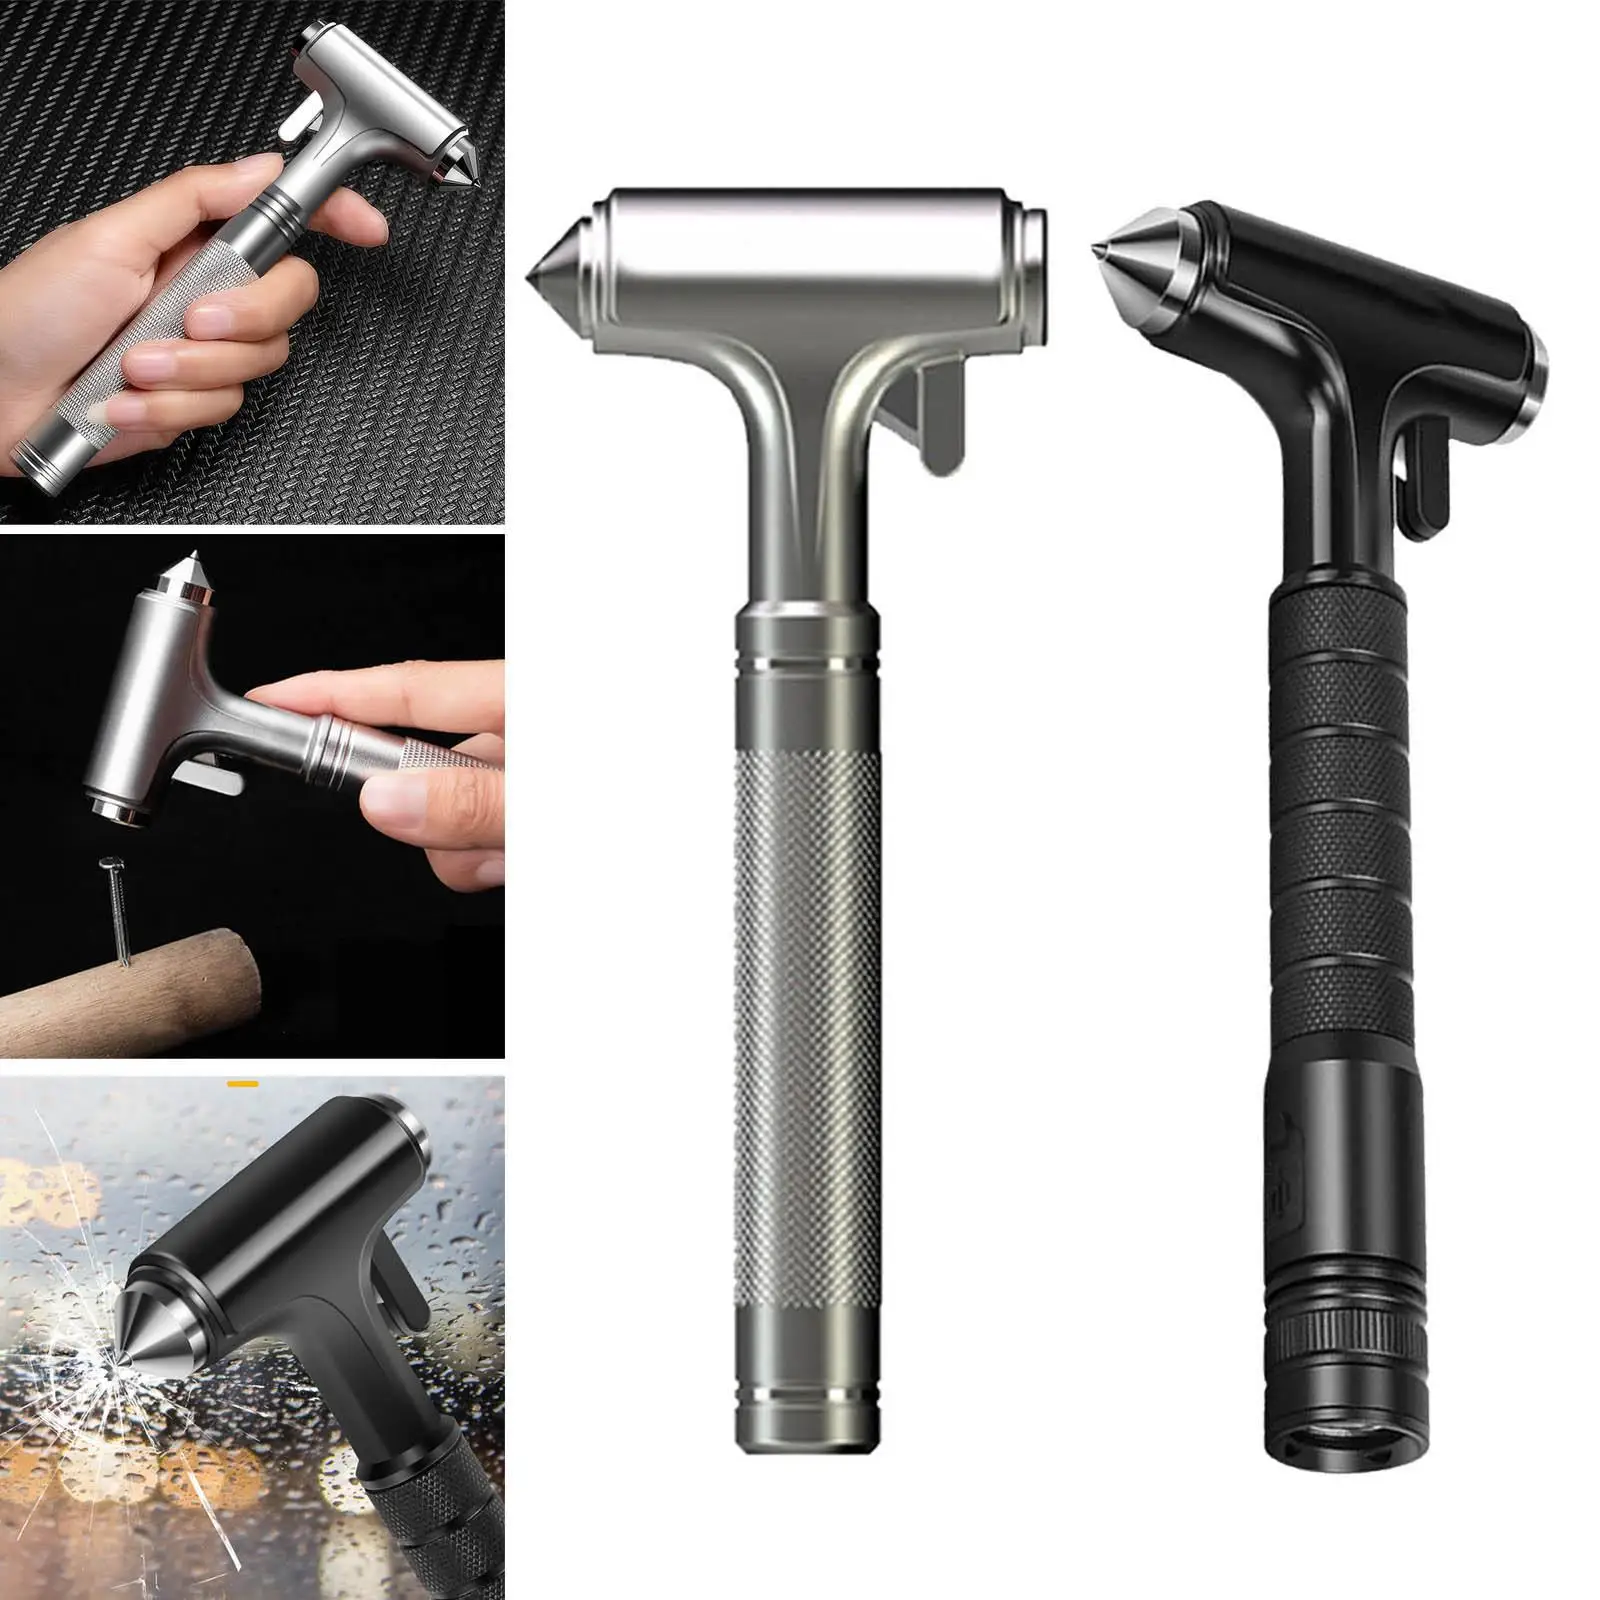 Car Safety Hammer, Built in  Cutter  Tool,  Window Glass Breaker Emergecy Portable Cars Supplies Multi Function